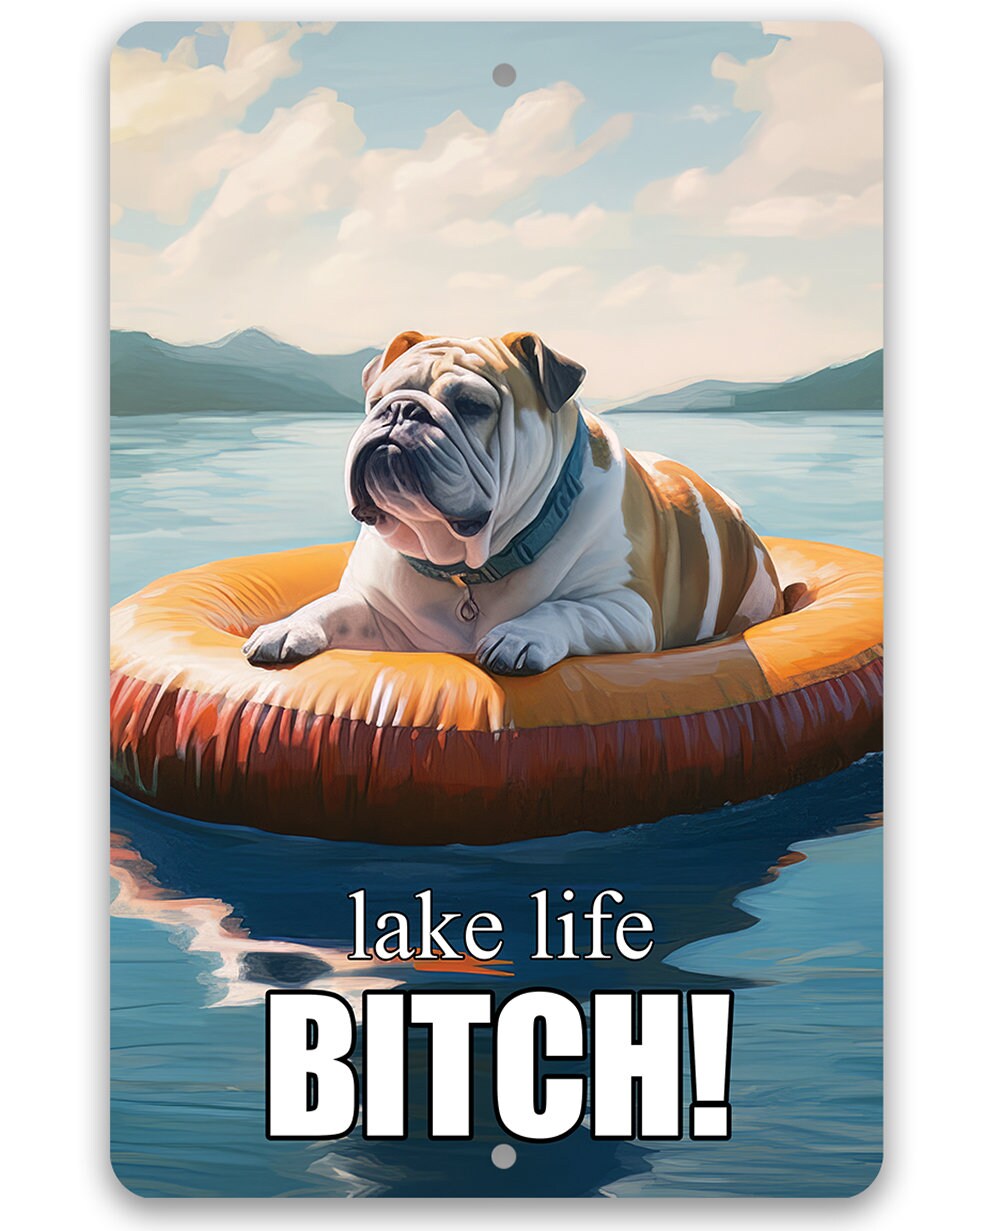 Tin - Bulldog Lake Signs for Dog Lovers-Lake Life Bitch! - Metal Sign - 8" x 12" or 12" x 18" Use Indoor/Outdoor -Lake House and Cabin Decor